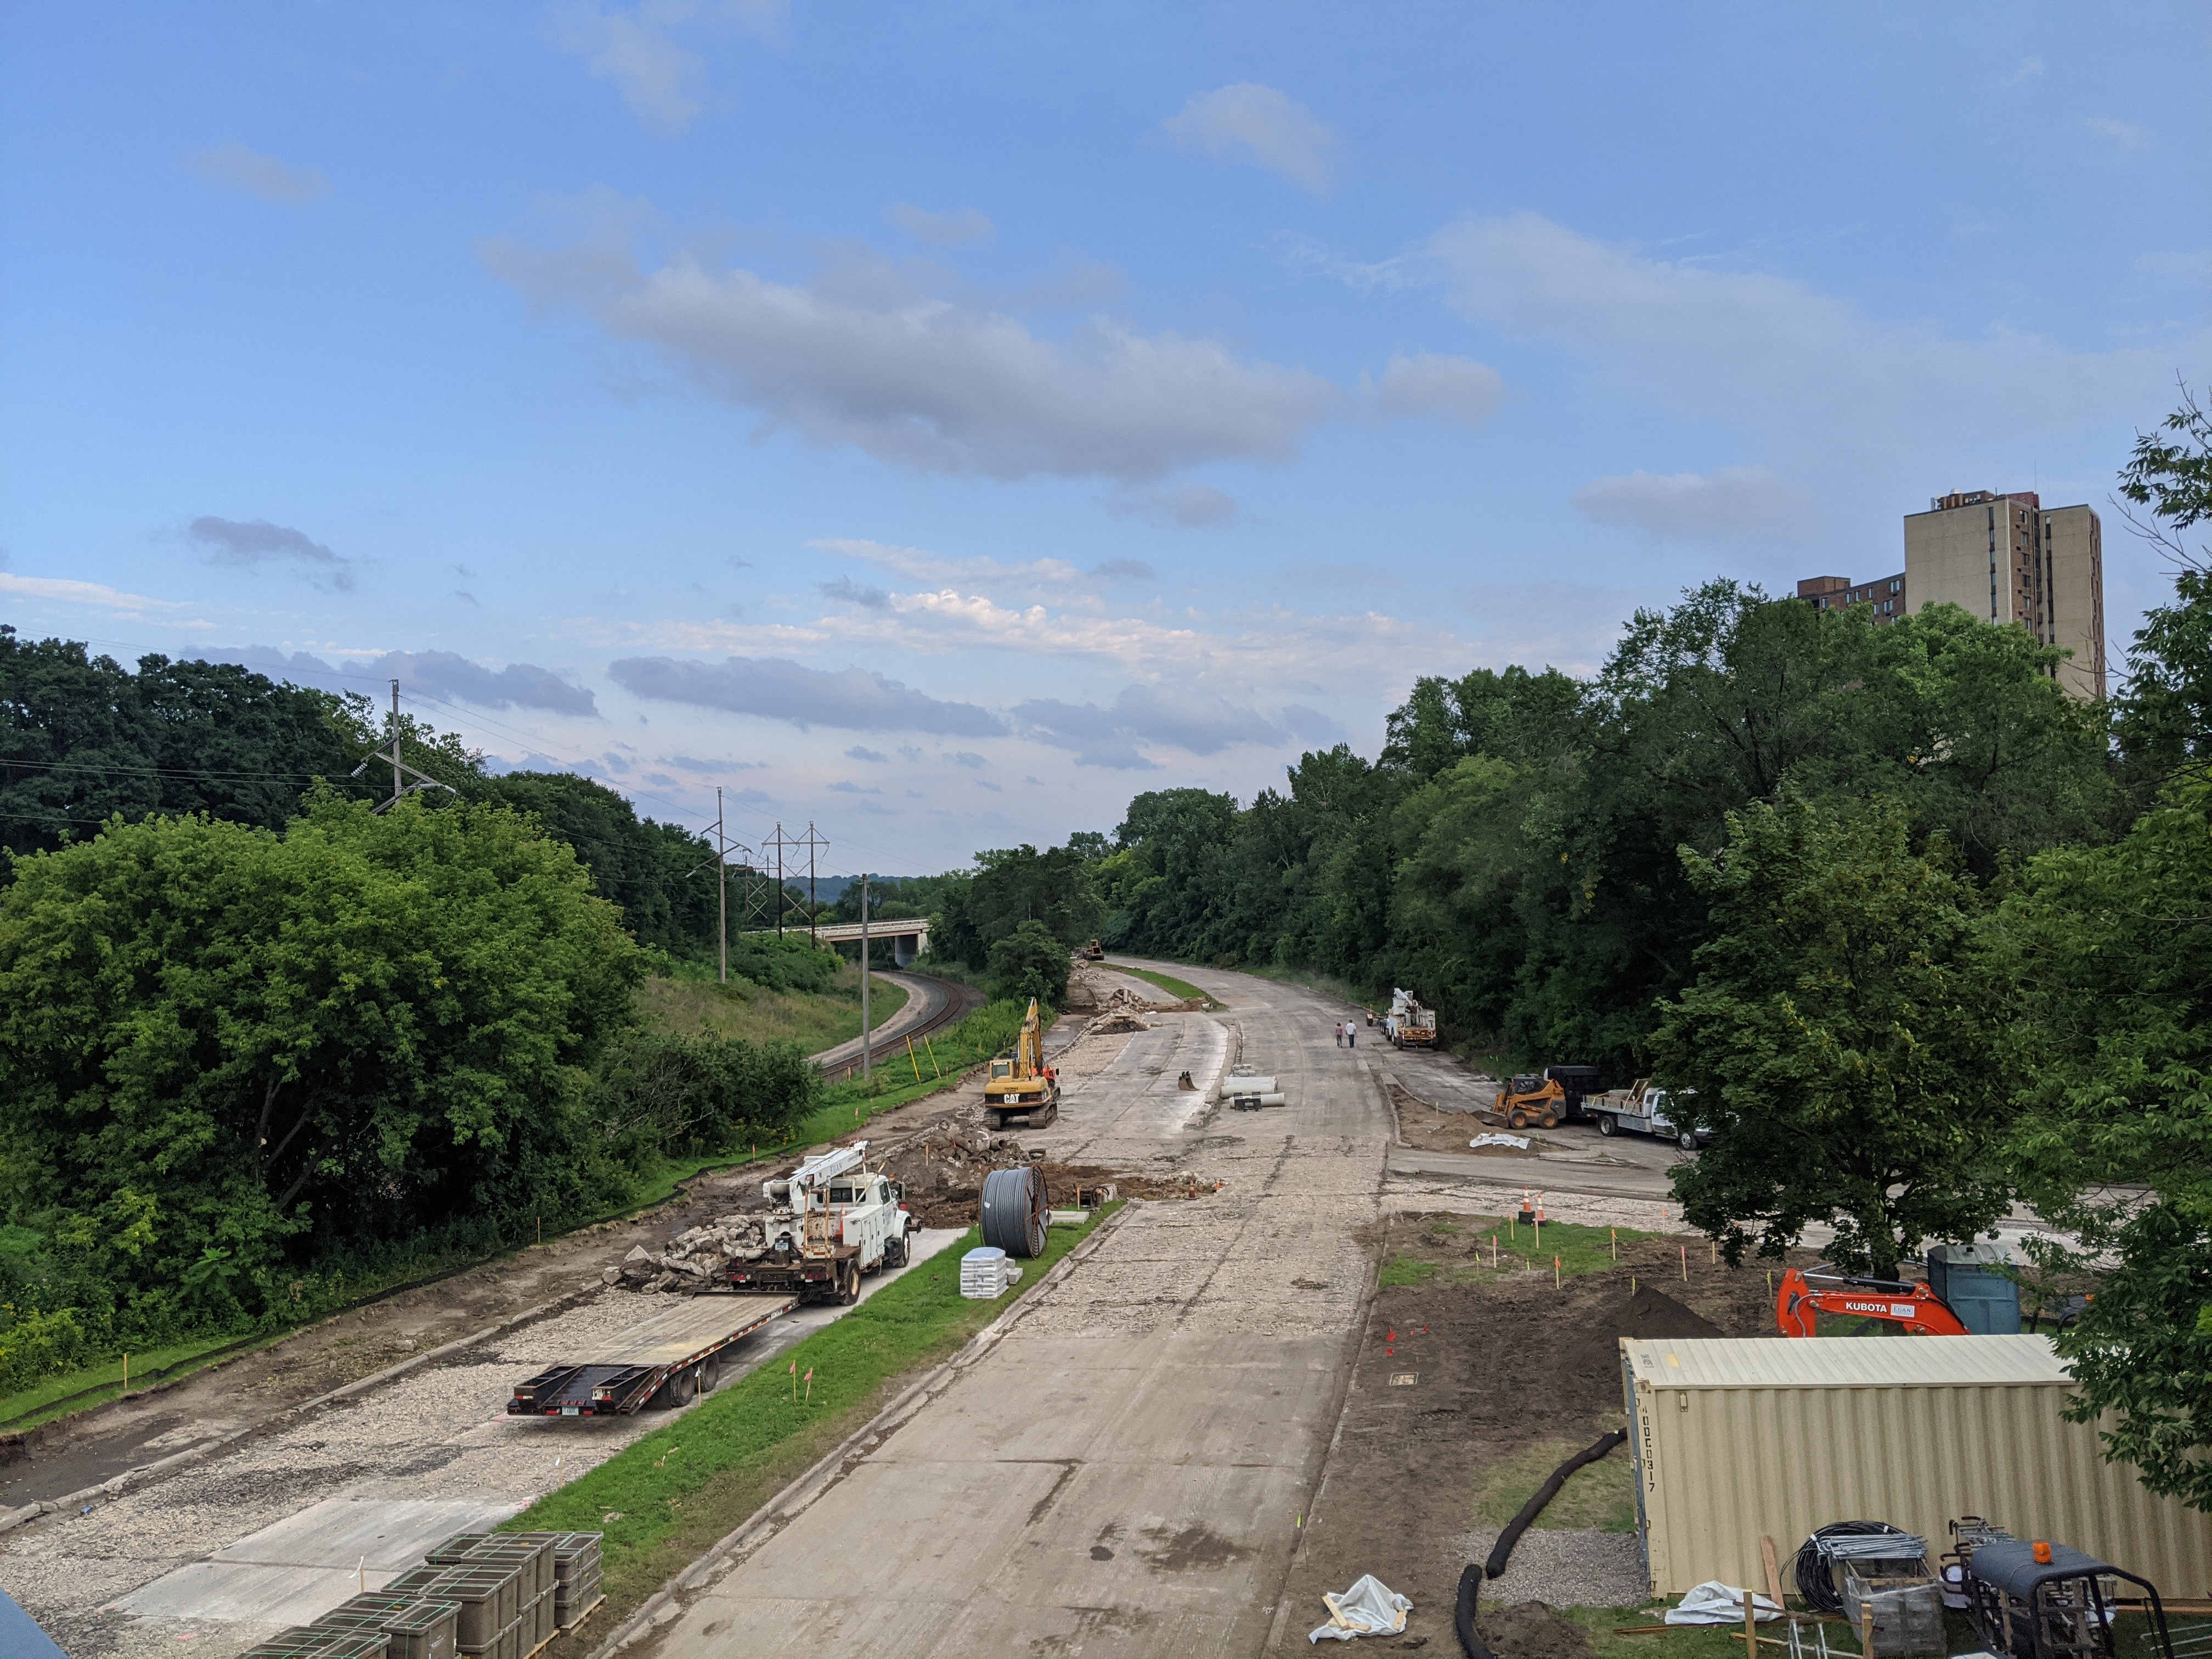 Ayd Mill Road under construction on 8.14.20. View from St. Clair overpass. Concrete road cut and rubbilized process underway. Trucks and other equipment in construction area.